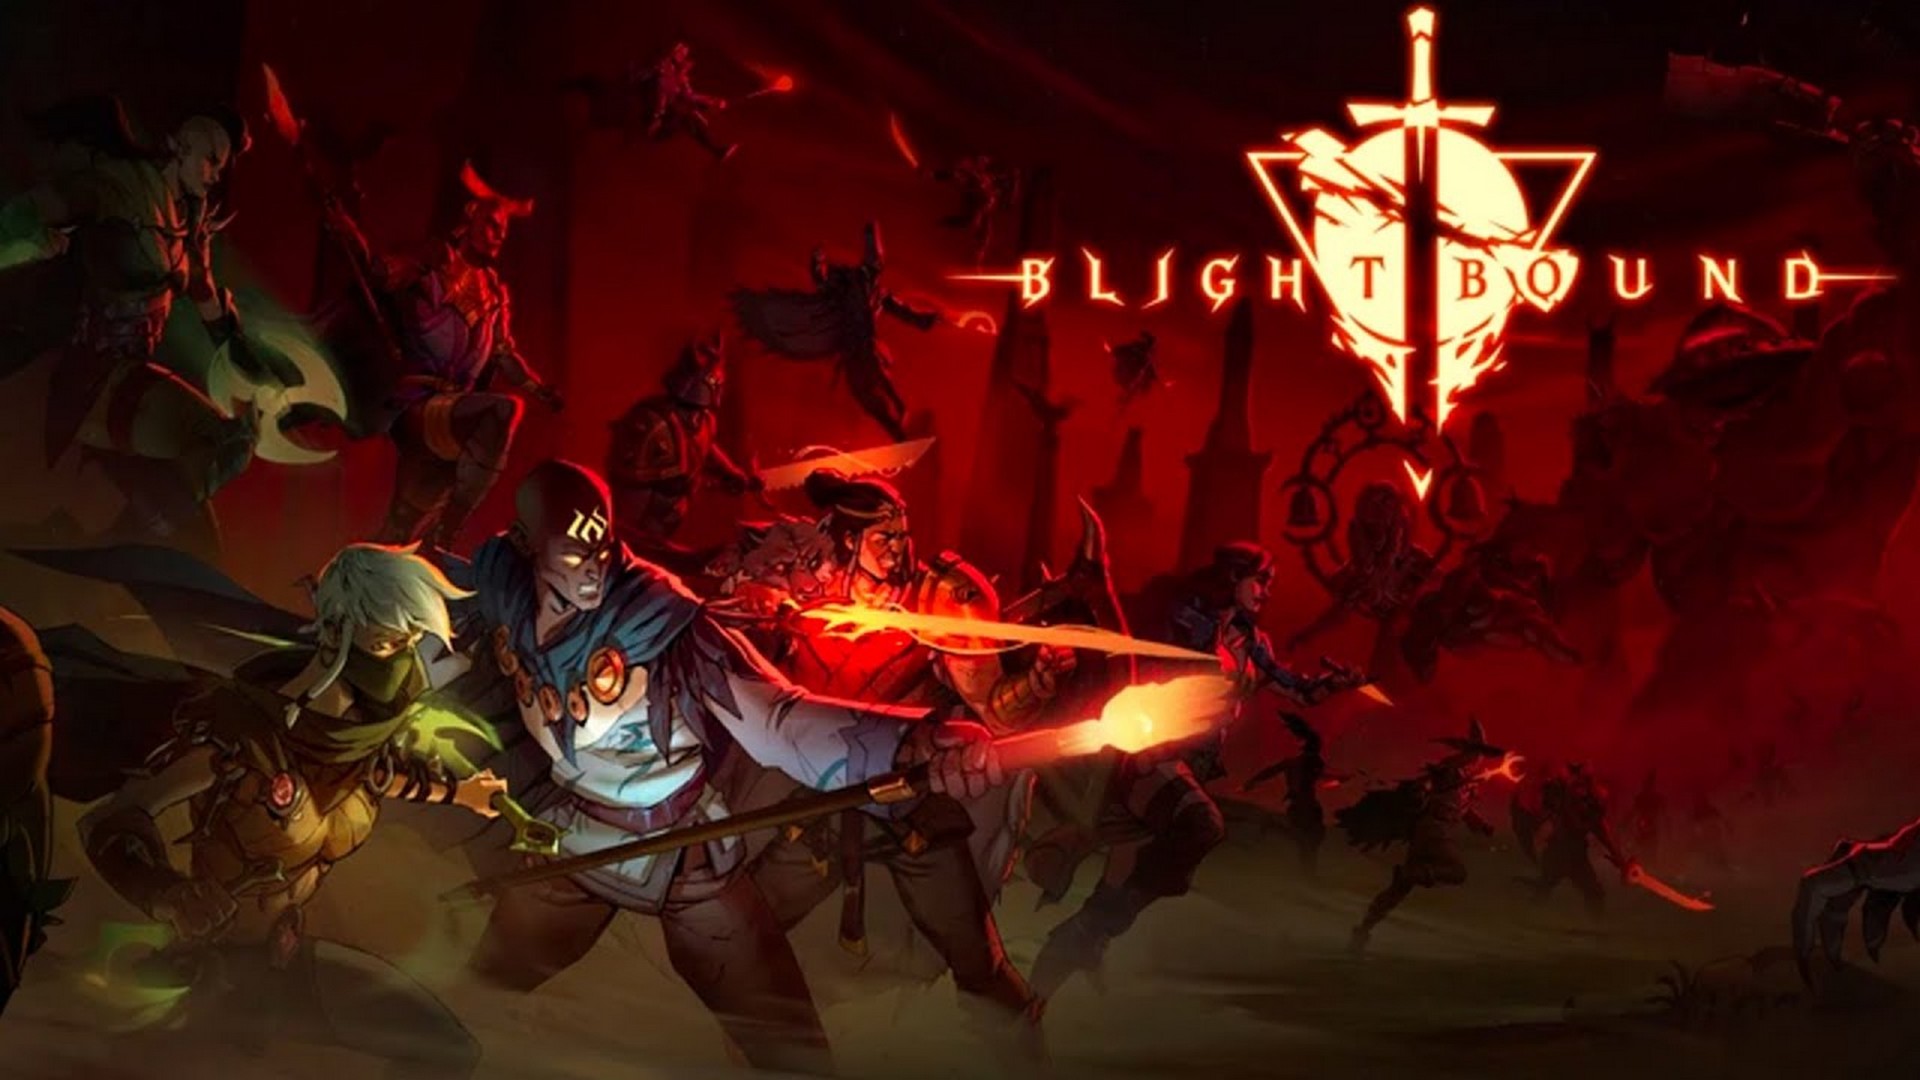 Multiplayer Dungeon Crawler Blightbound Out Now On PC & Consoles